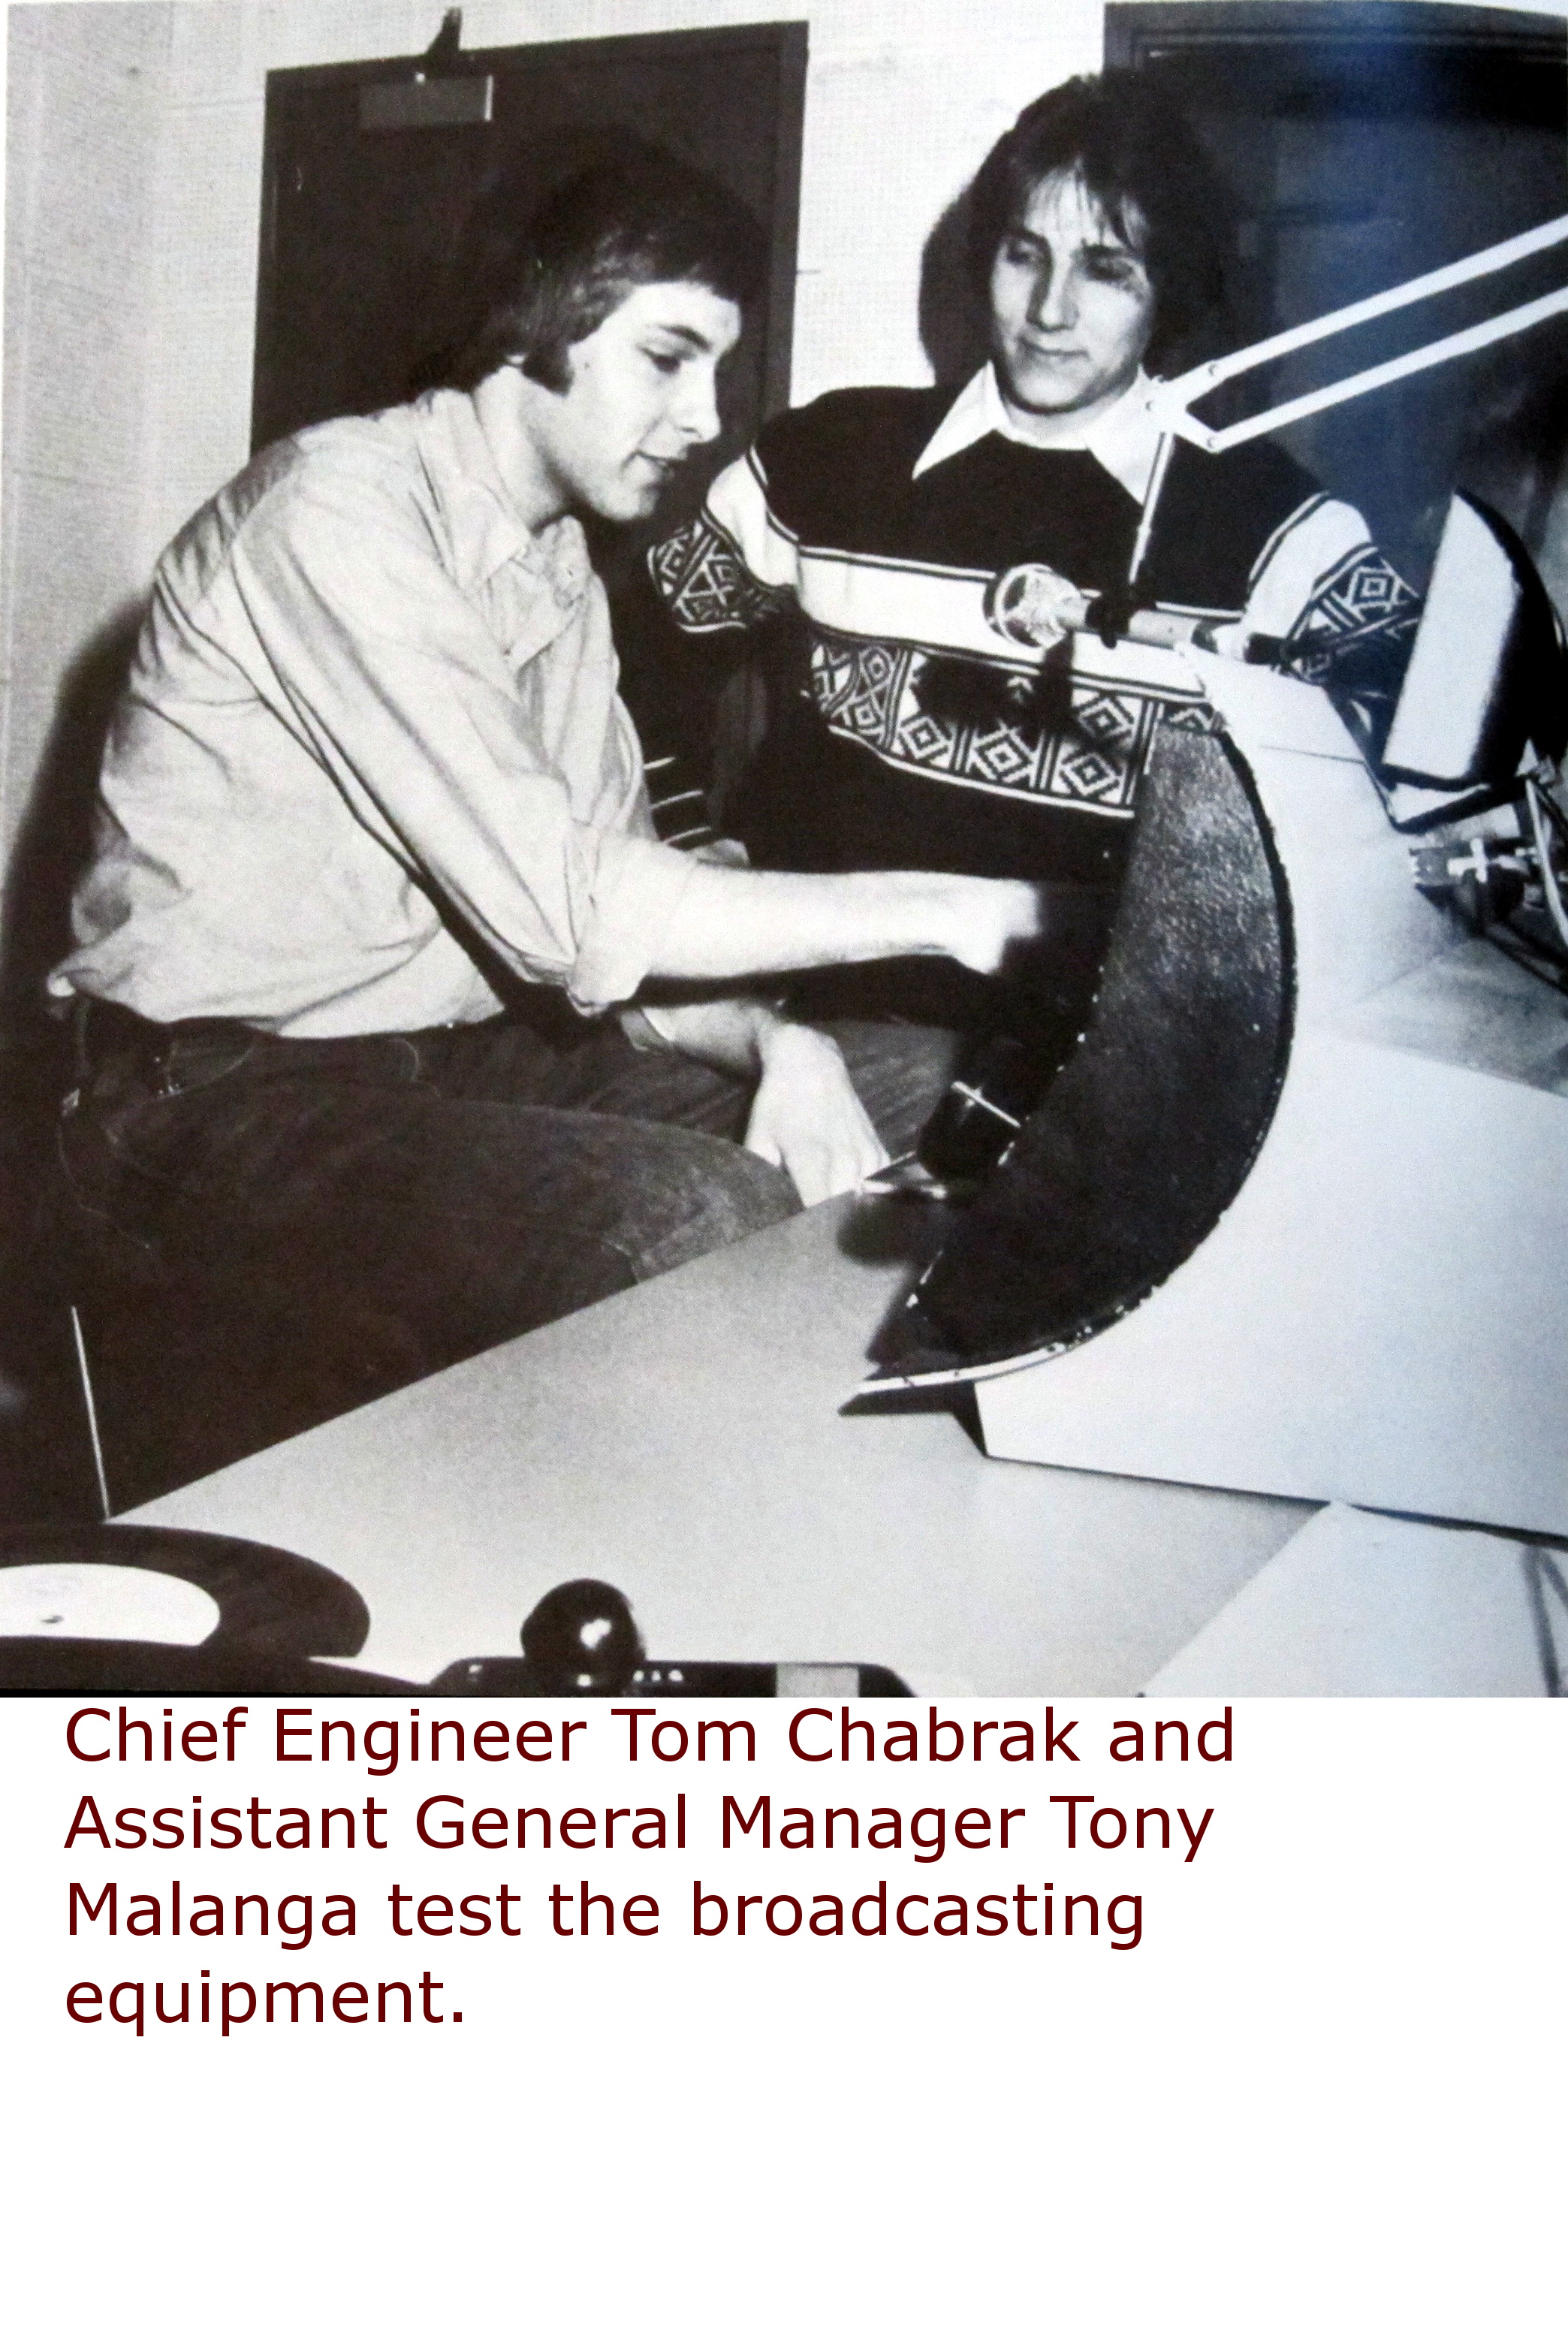 1979 - Chief Engineer Tom Chabrak and Assistant General Manager Tony Malanga.